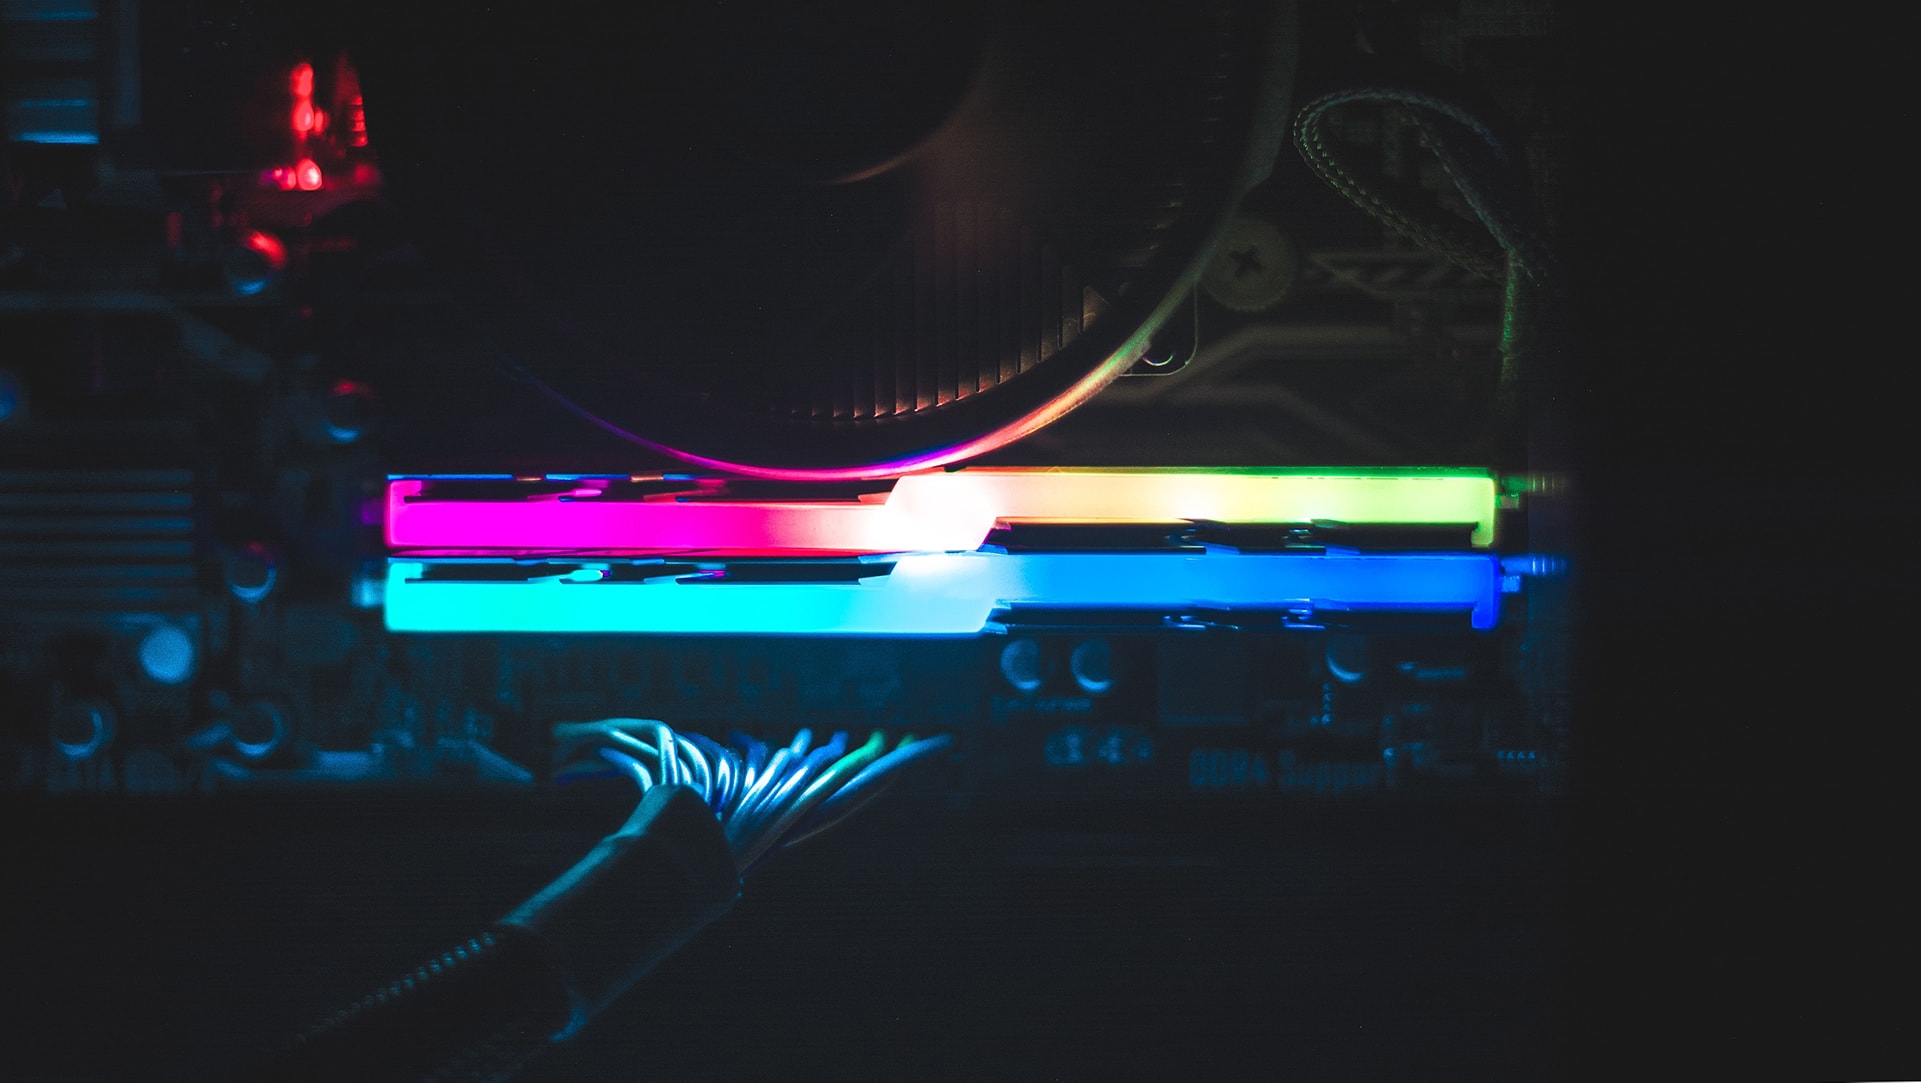 Close-up photo of computer hardward with colorful lights | Photo by Akshar Dave on Unsplash